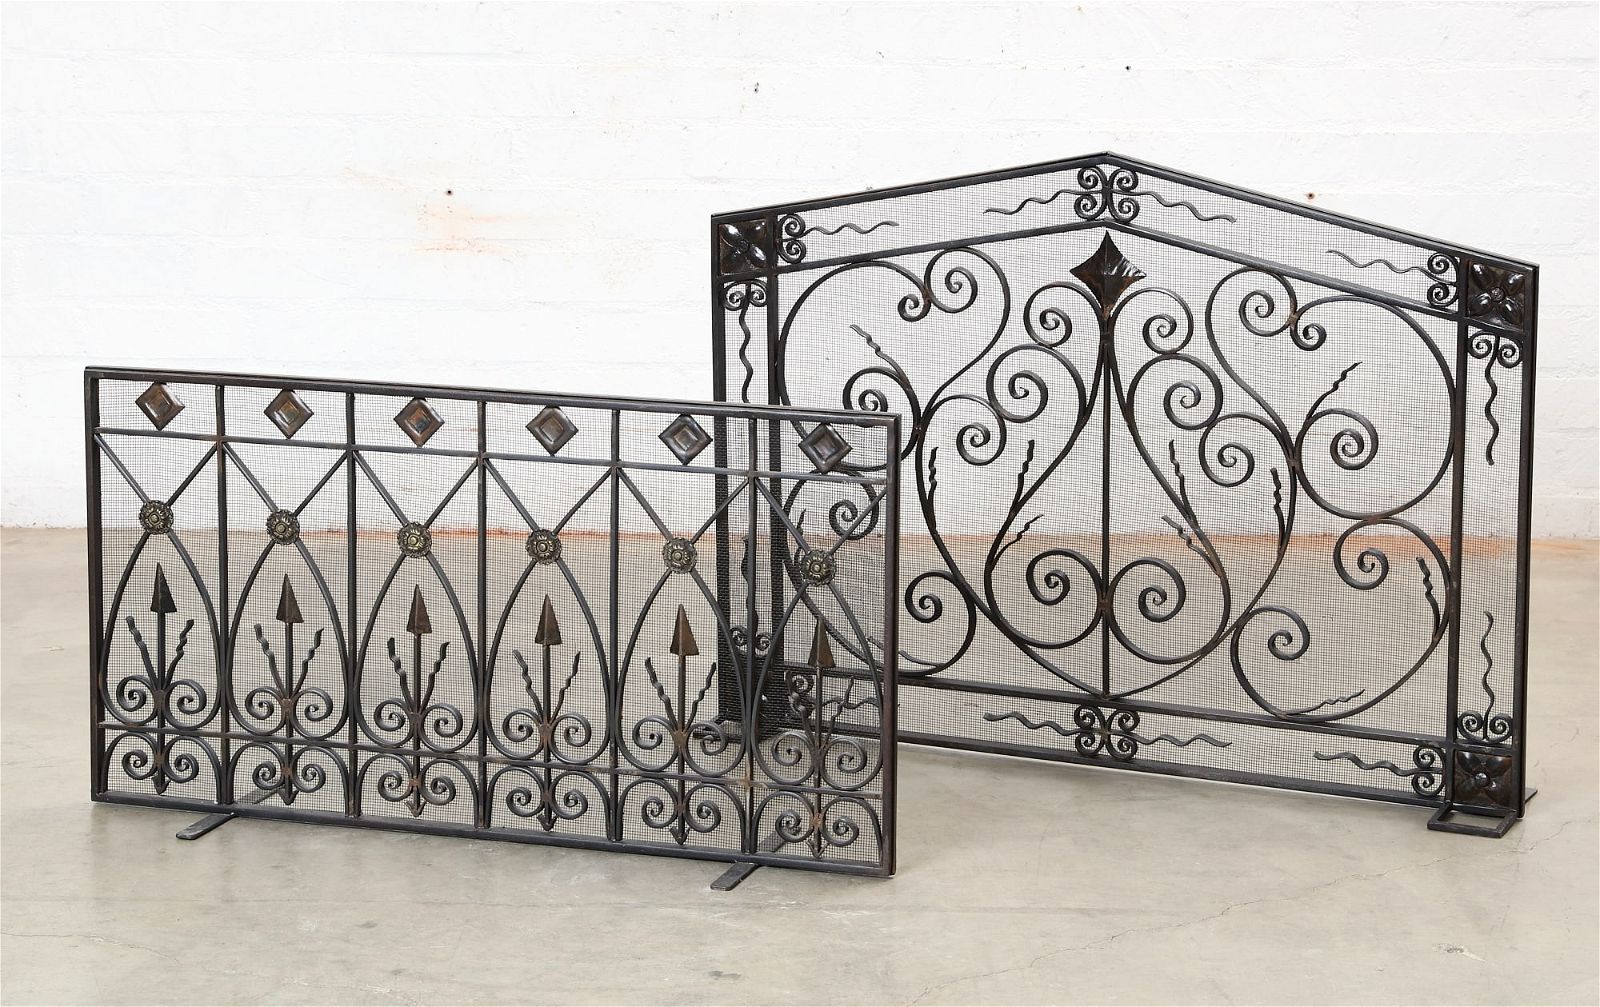 TWO WROUGHT IRON FIRE SCREENSTwo